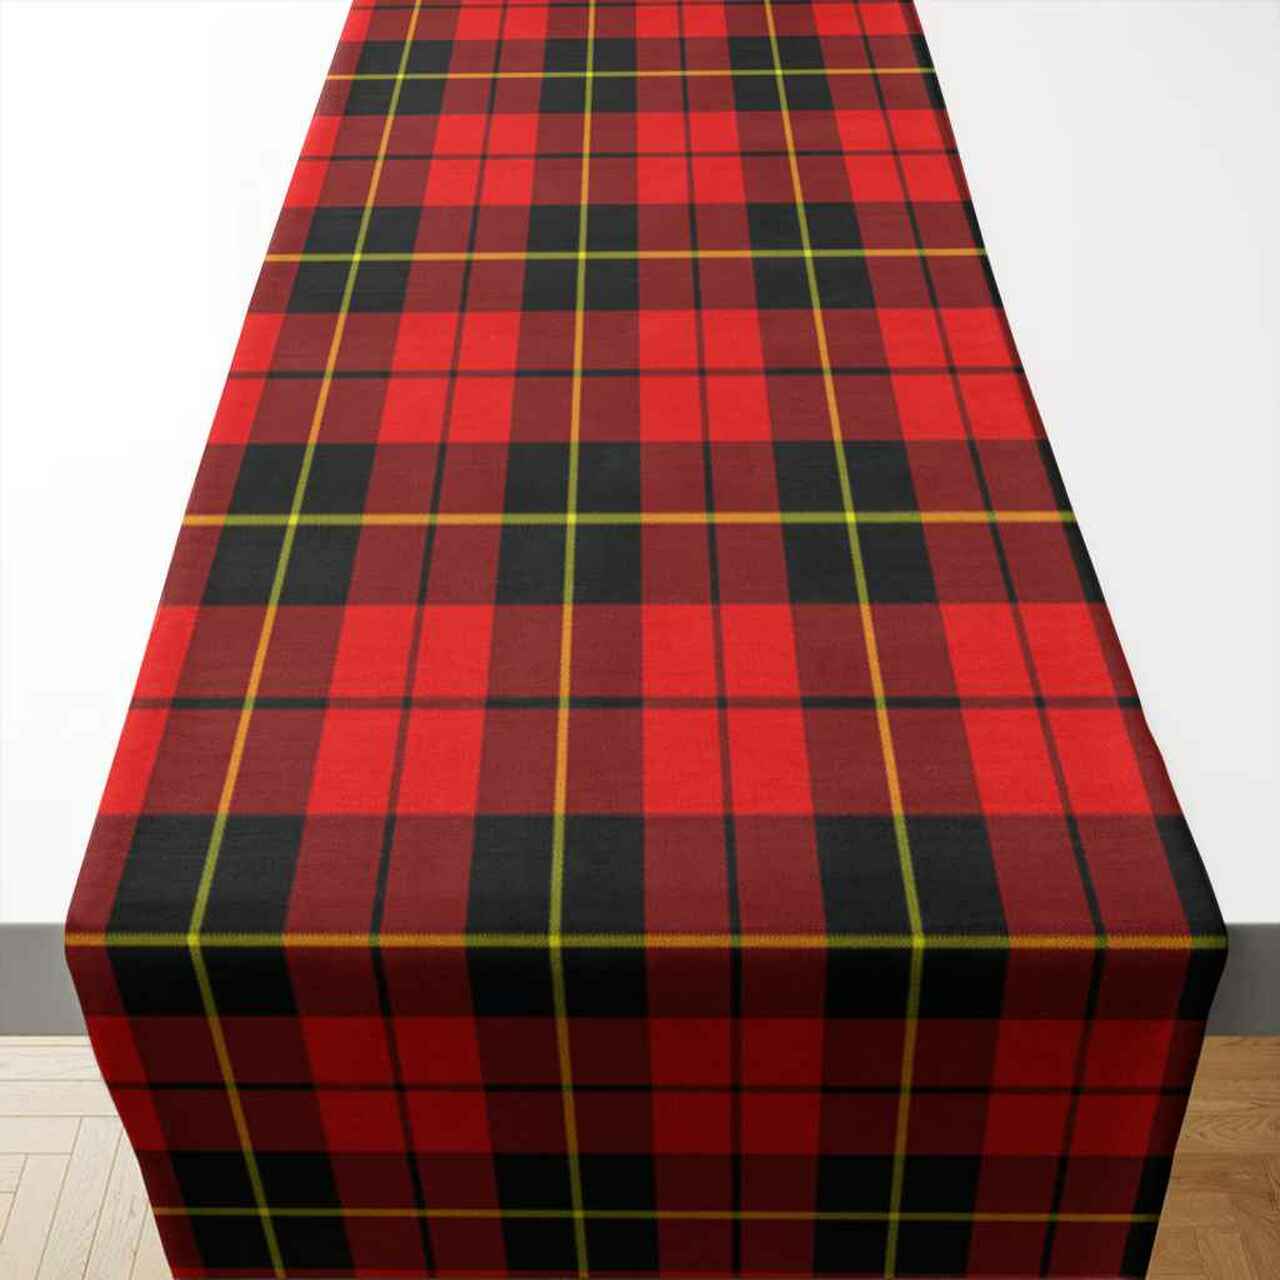 Wallace Hunting - Red Tartan Table Runner - Cotton table runner